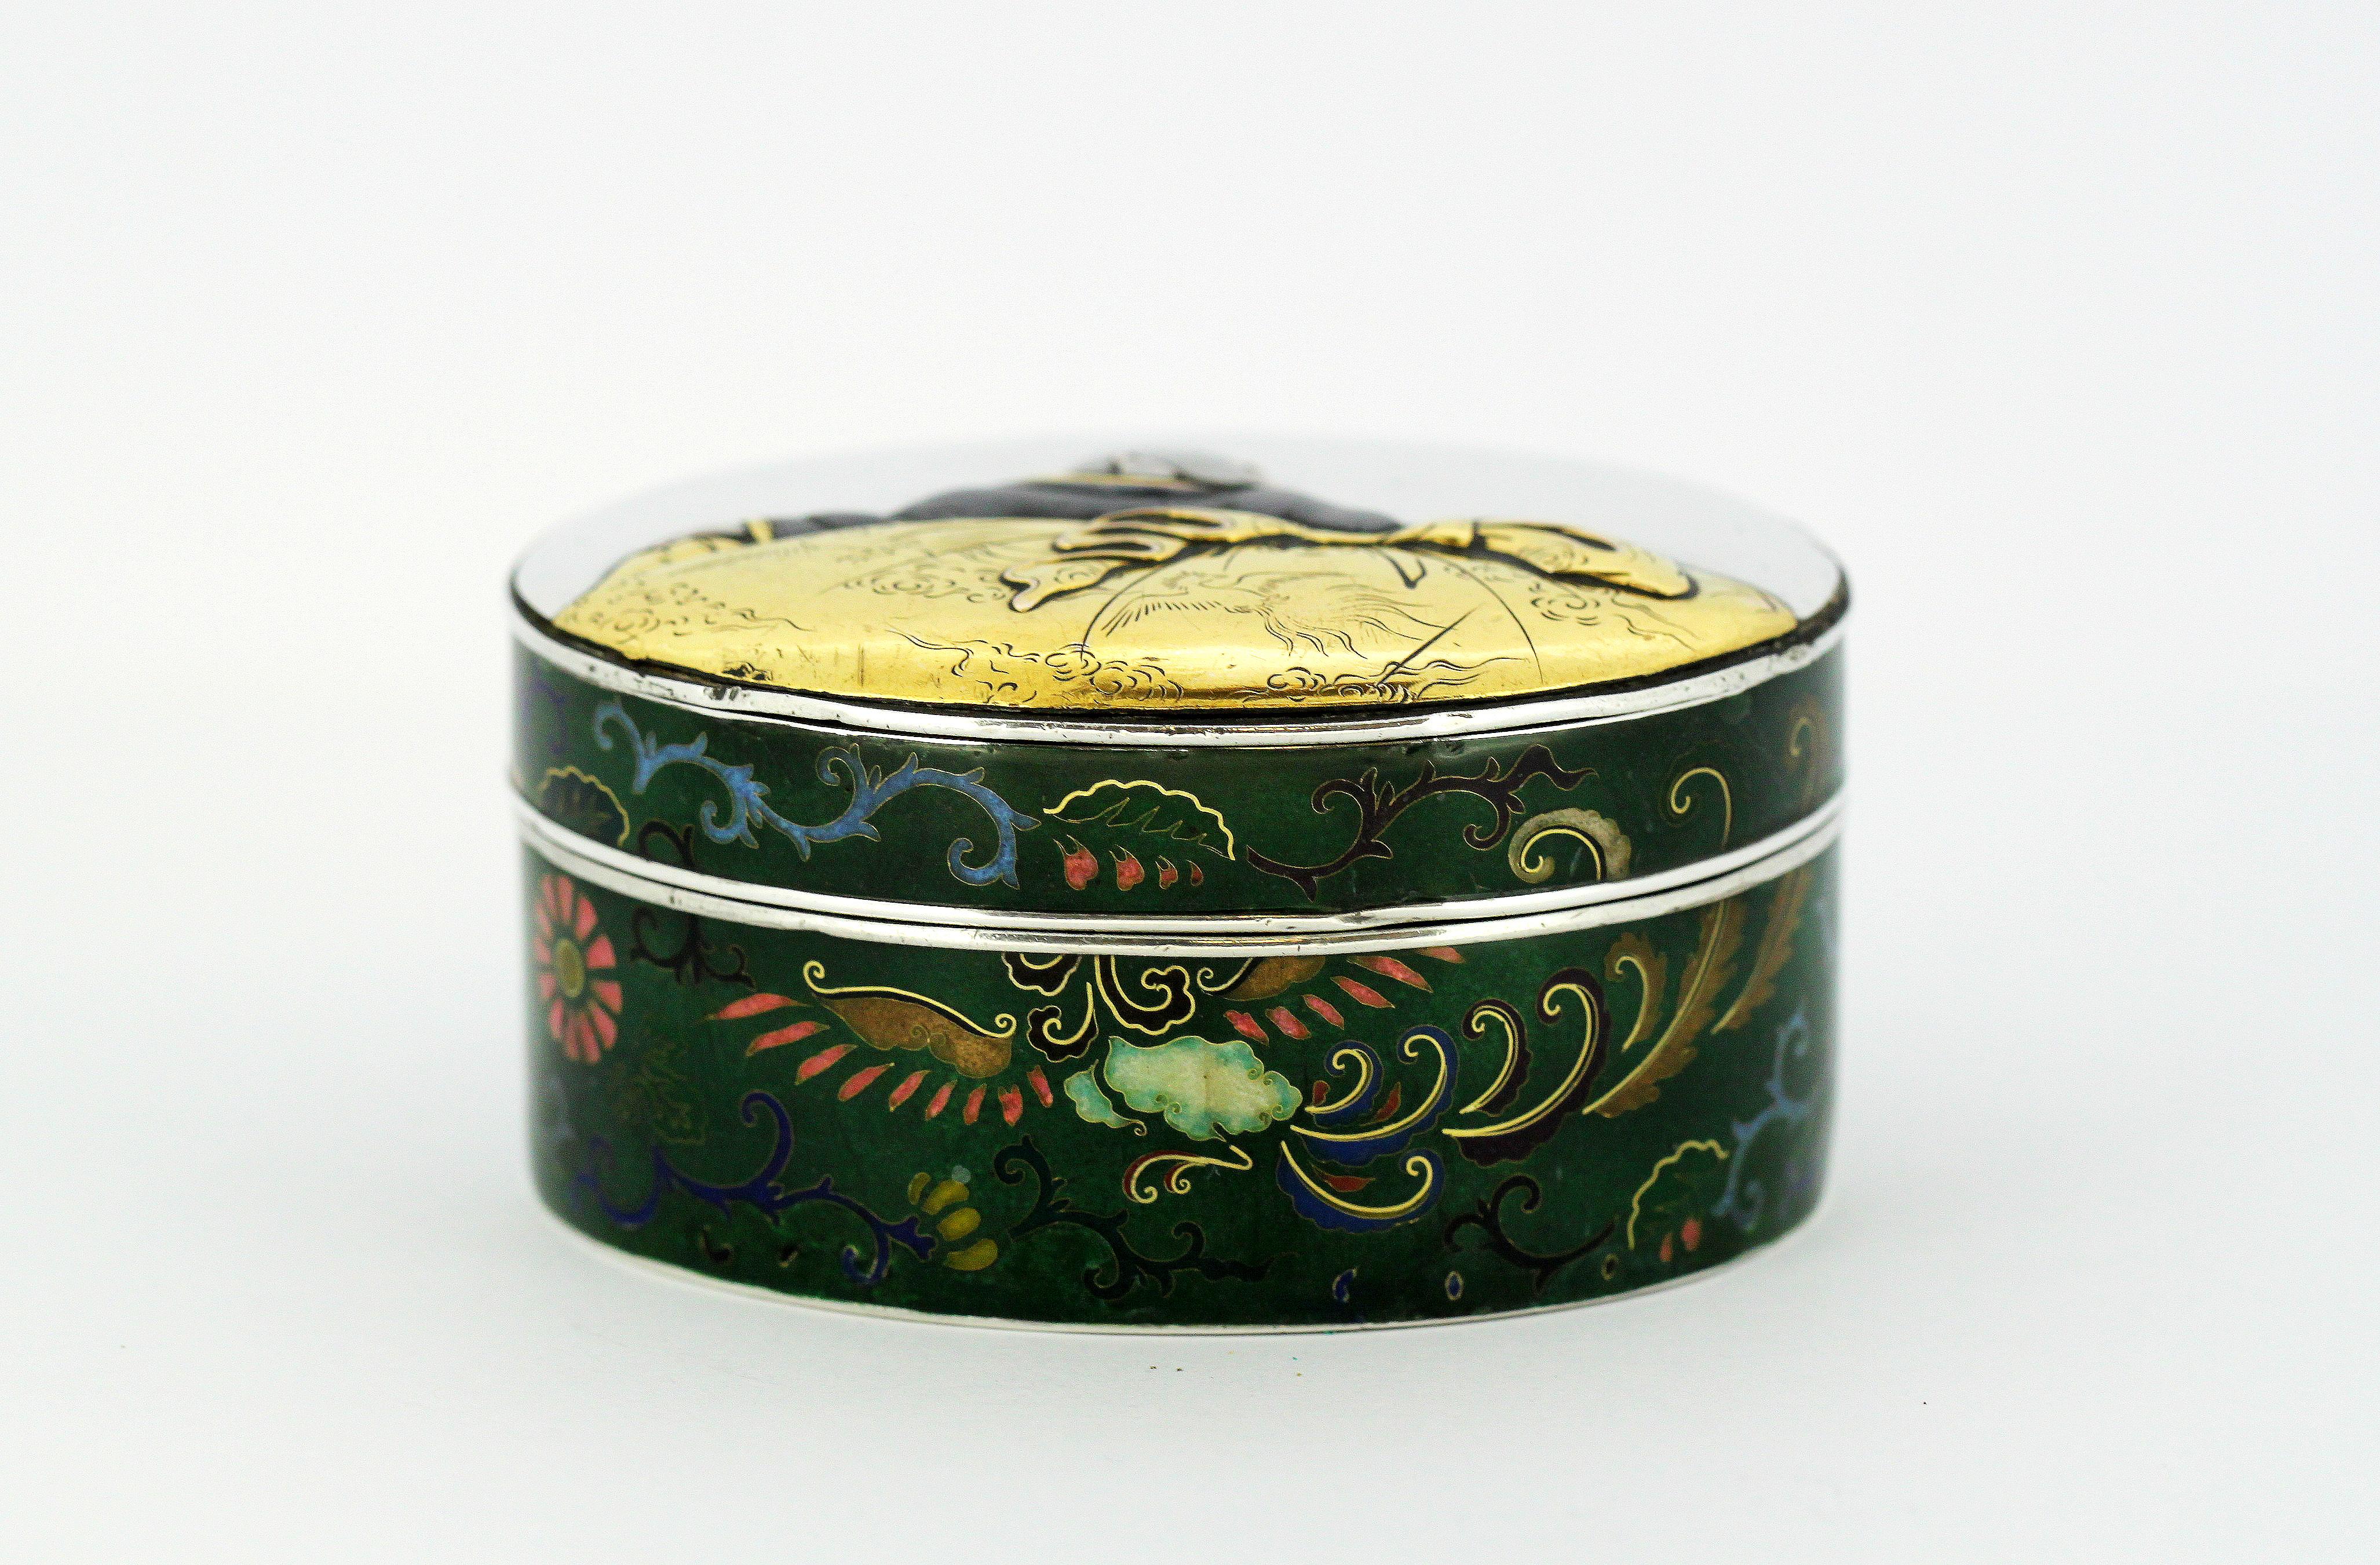 Antique Japanese Meiji period 22-karat gold, silver, copper and enamel box.
Made in Japan, 19th century.

The Meiji era is an era of Japanese history which extended from October 23, 1868 to July 30, 1912. This era represents the first half of the